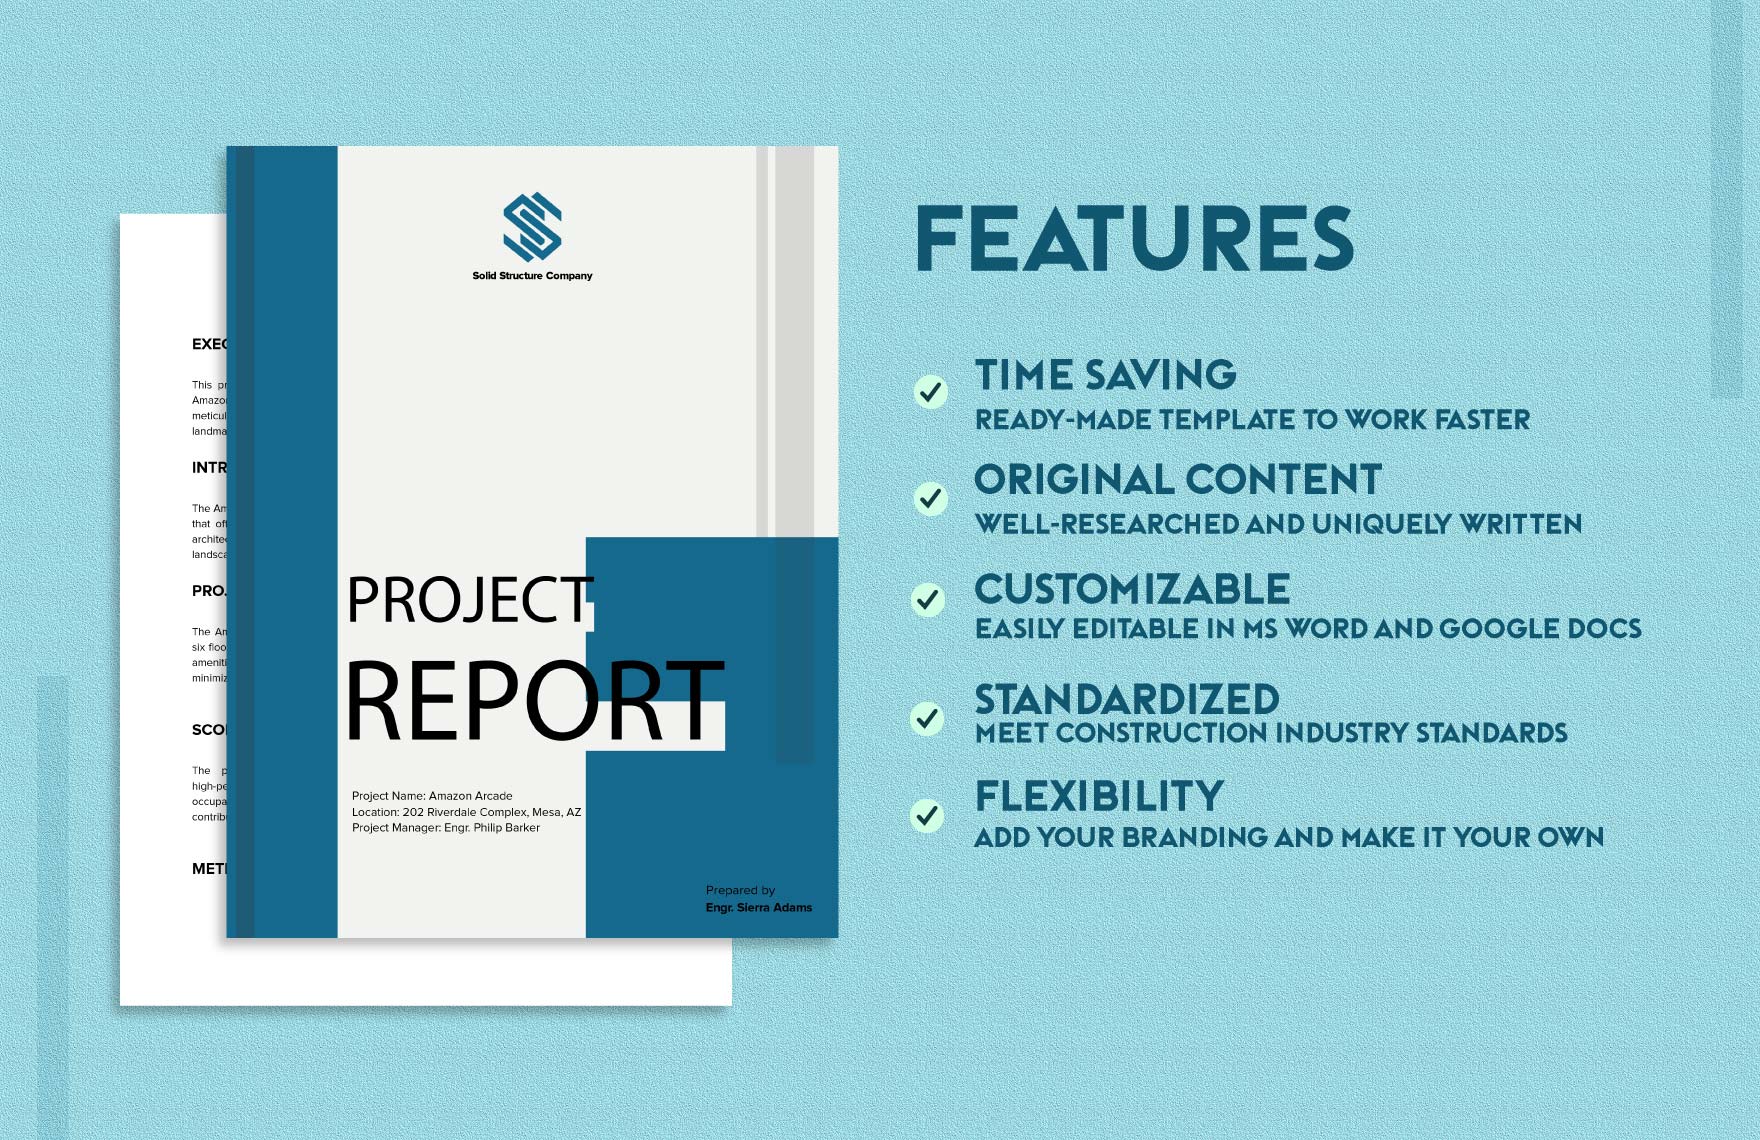 Engineering Project Report Template